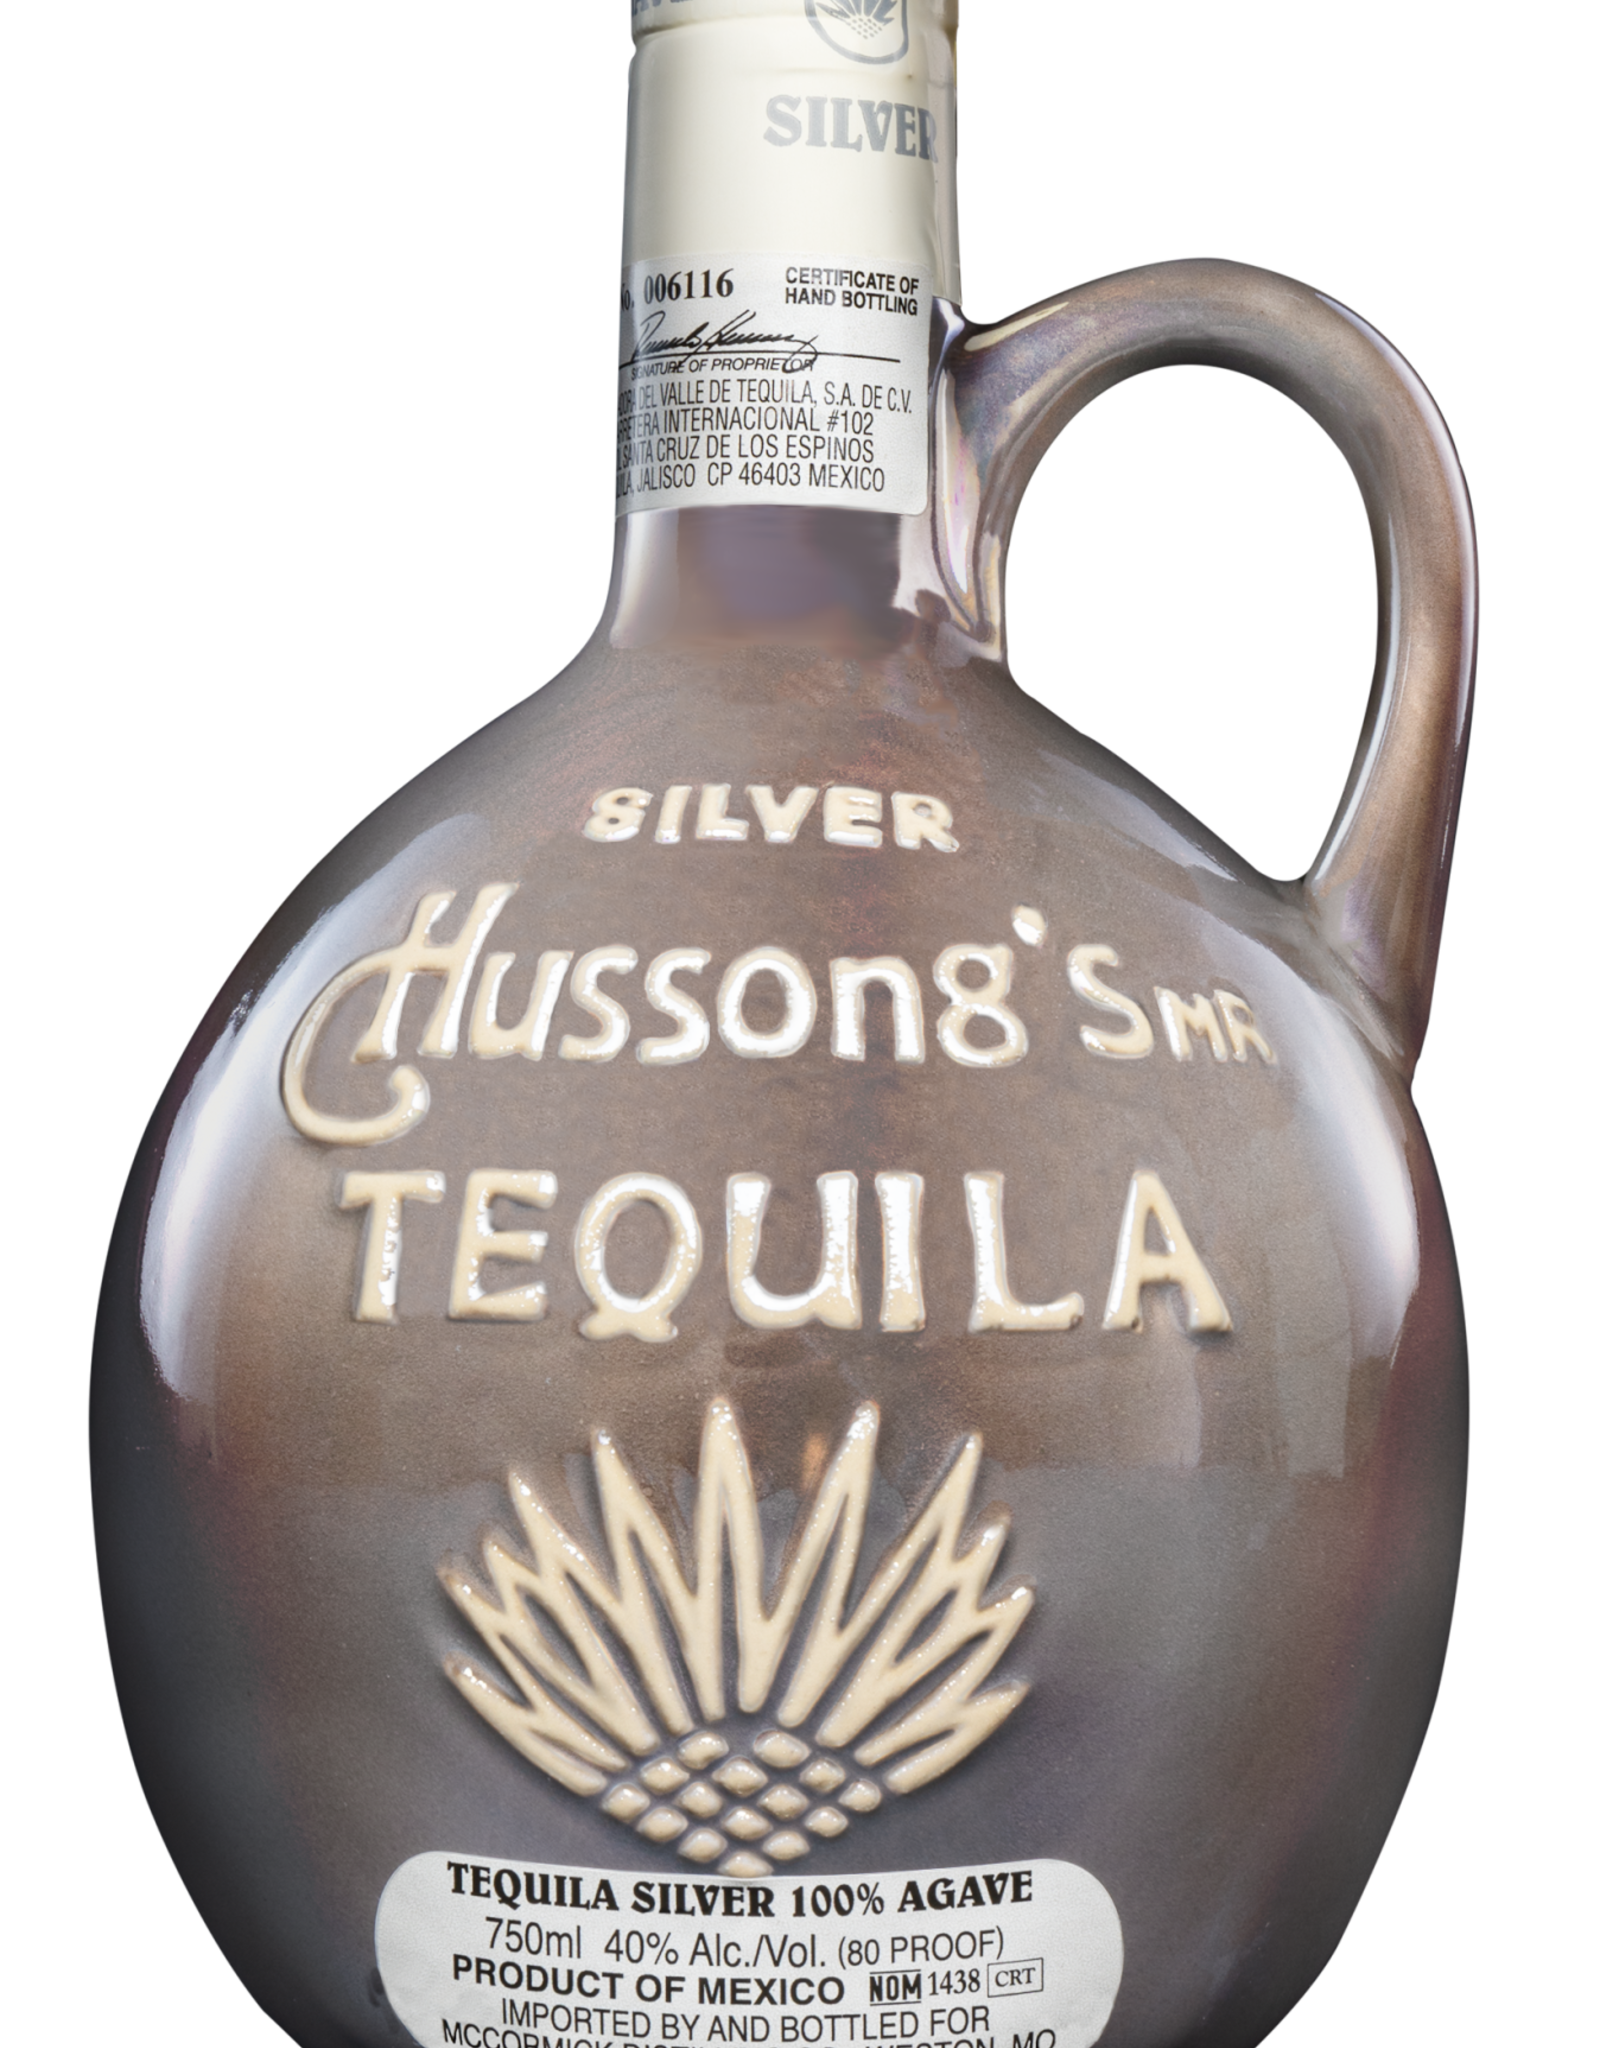 Hussongs Hussong's  Silver Tequila